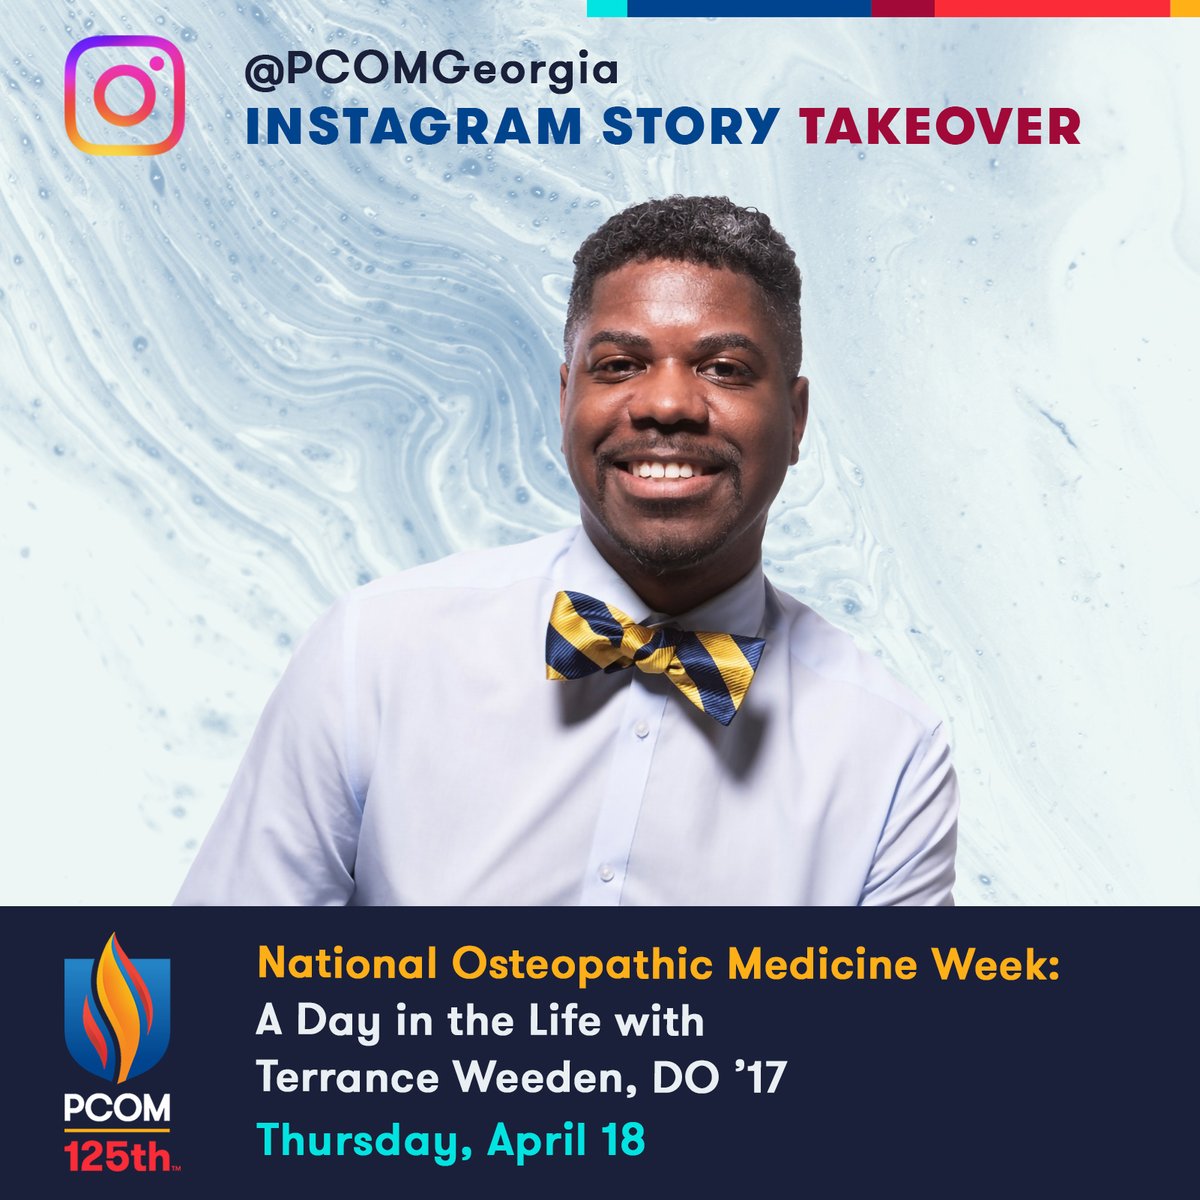 In celebrating #NOMWeek, we're excited to partner with Terrance Weeden, DO '17, to offer an inside look at life as a doctor. On 4/18, follow along on our IG Story at instagram.com/pcomgeorgia/ as he leads us through his day as a Staff Adolescent Physician at Whitman-Walker Health!